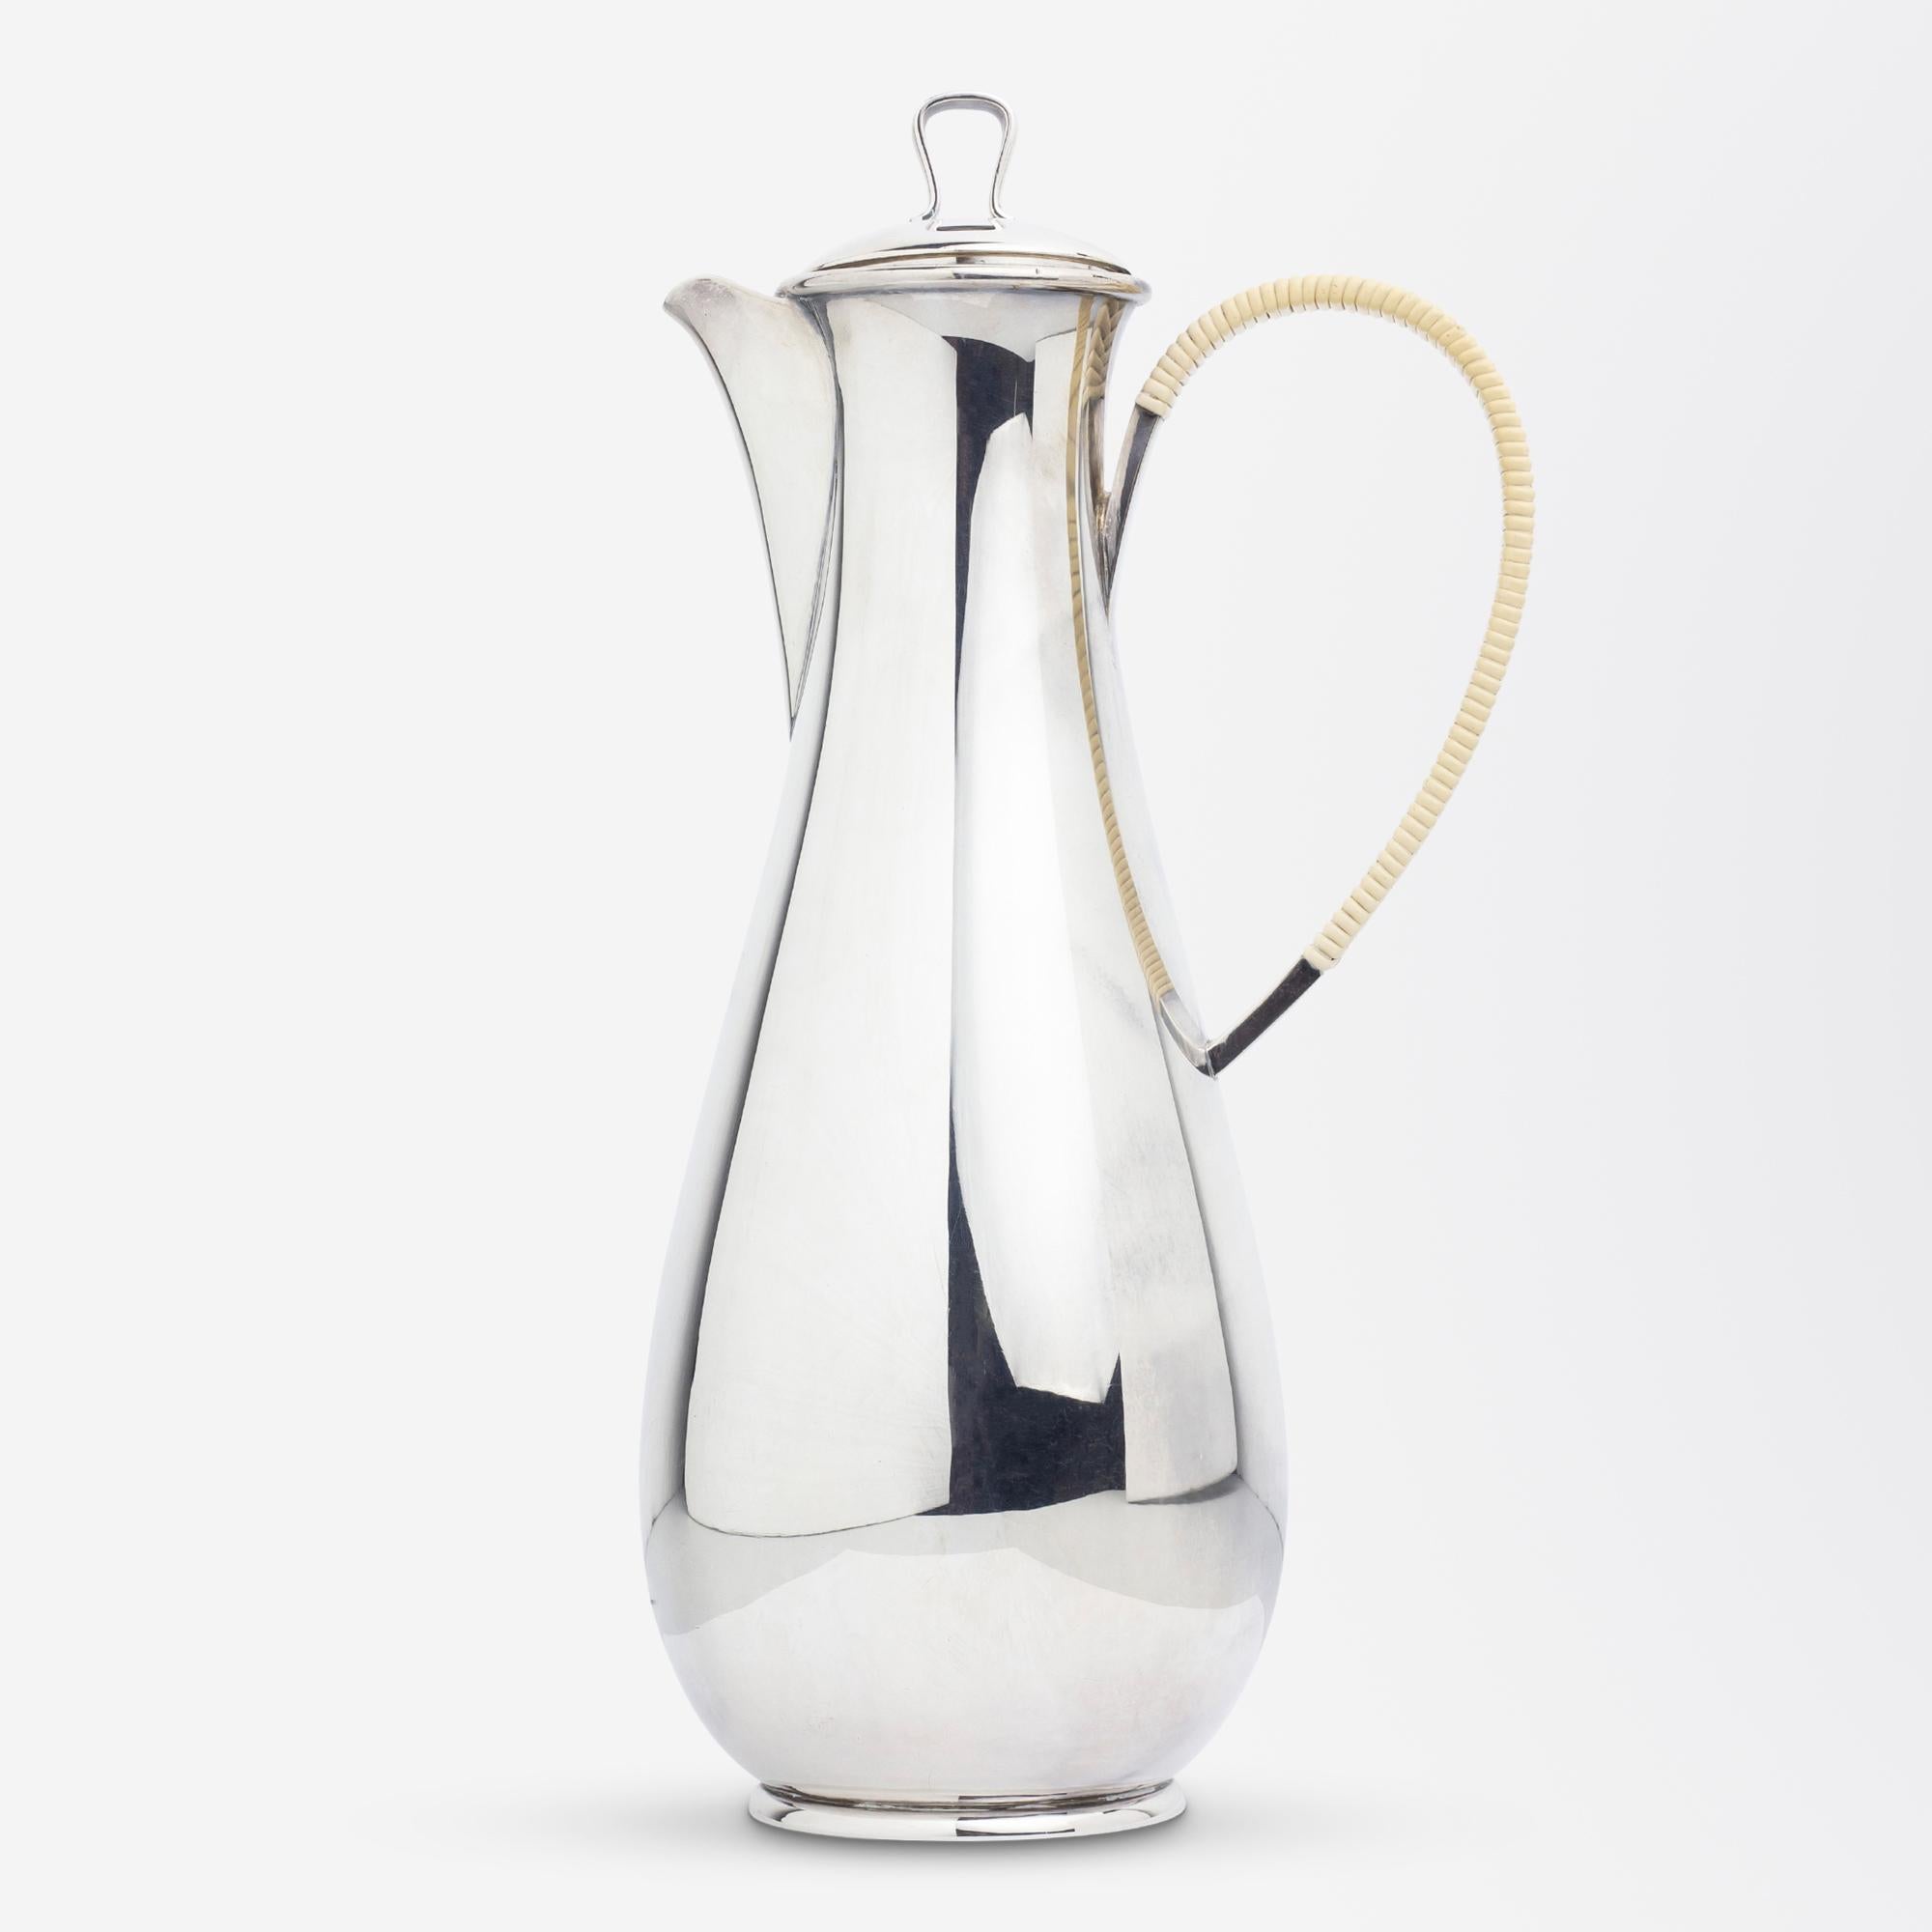 This three piece sterling silver coffee set was designed by Sigvard Bernadotte and manufactured by Georg Jensen. The elongated set is known as pattern '967' and is one of the more scarce designs by Sigvard Bernadotte, accented with a woven